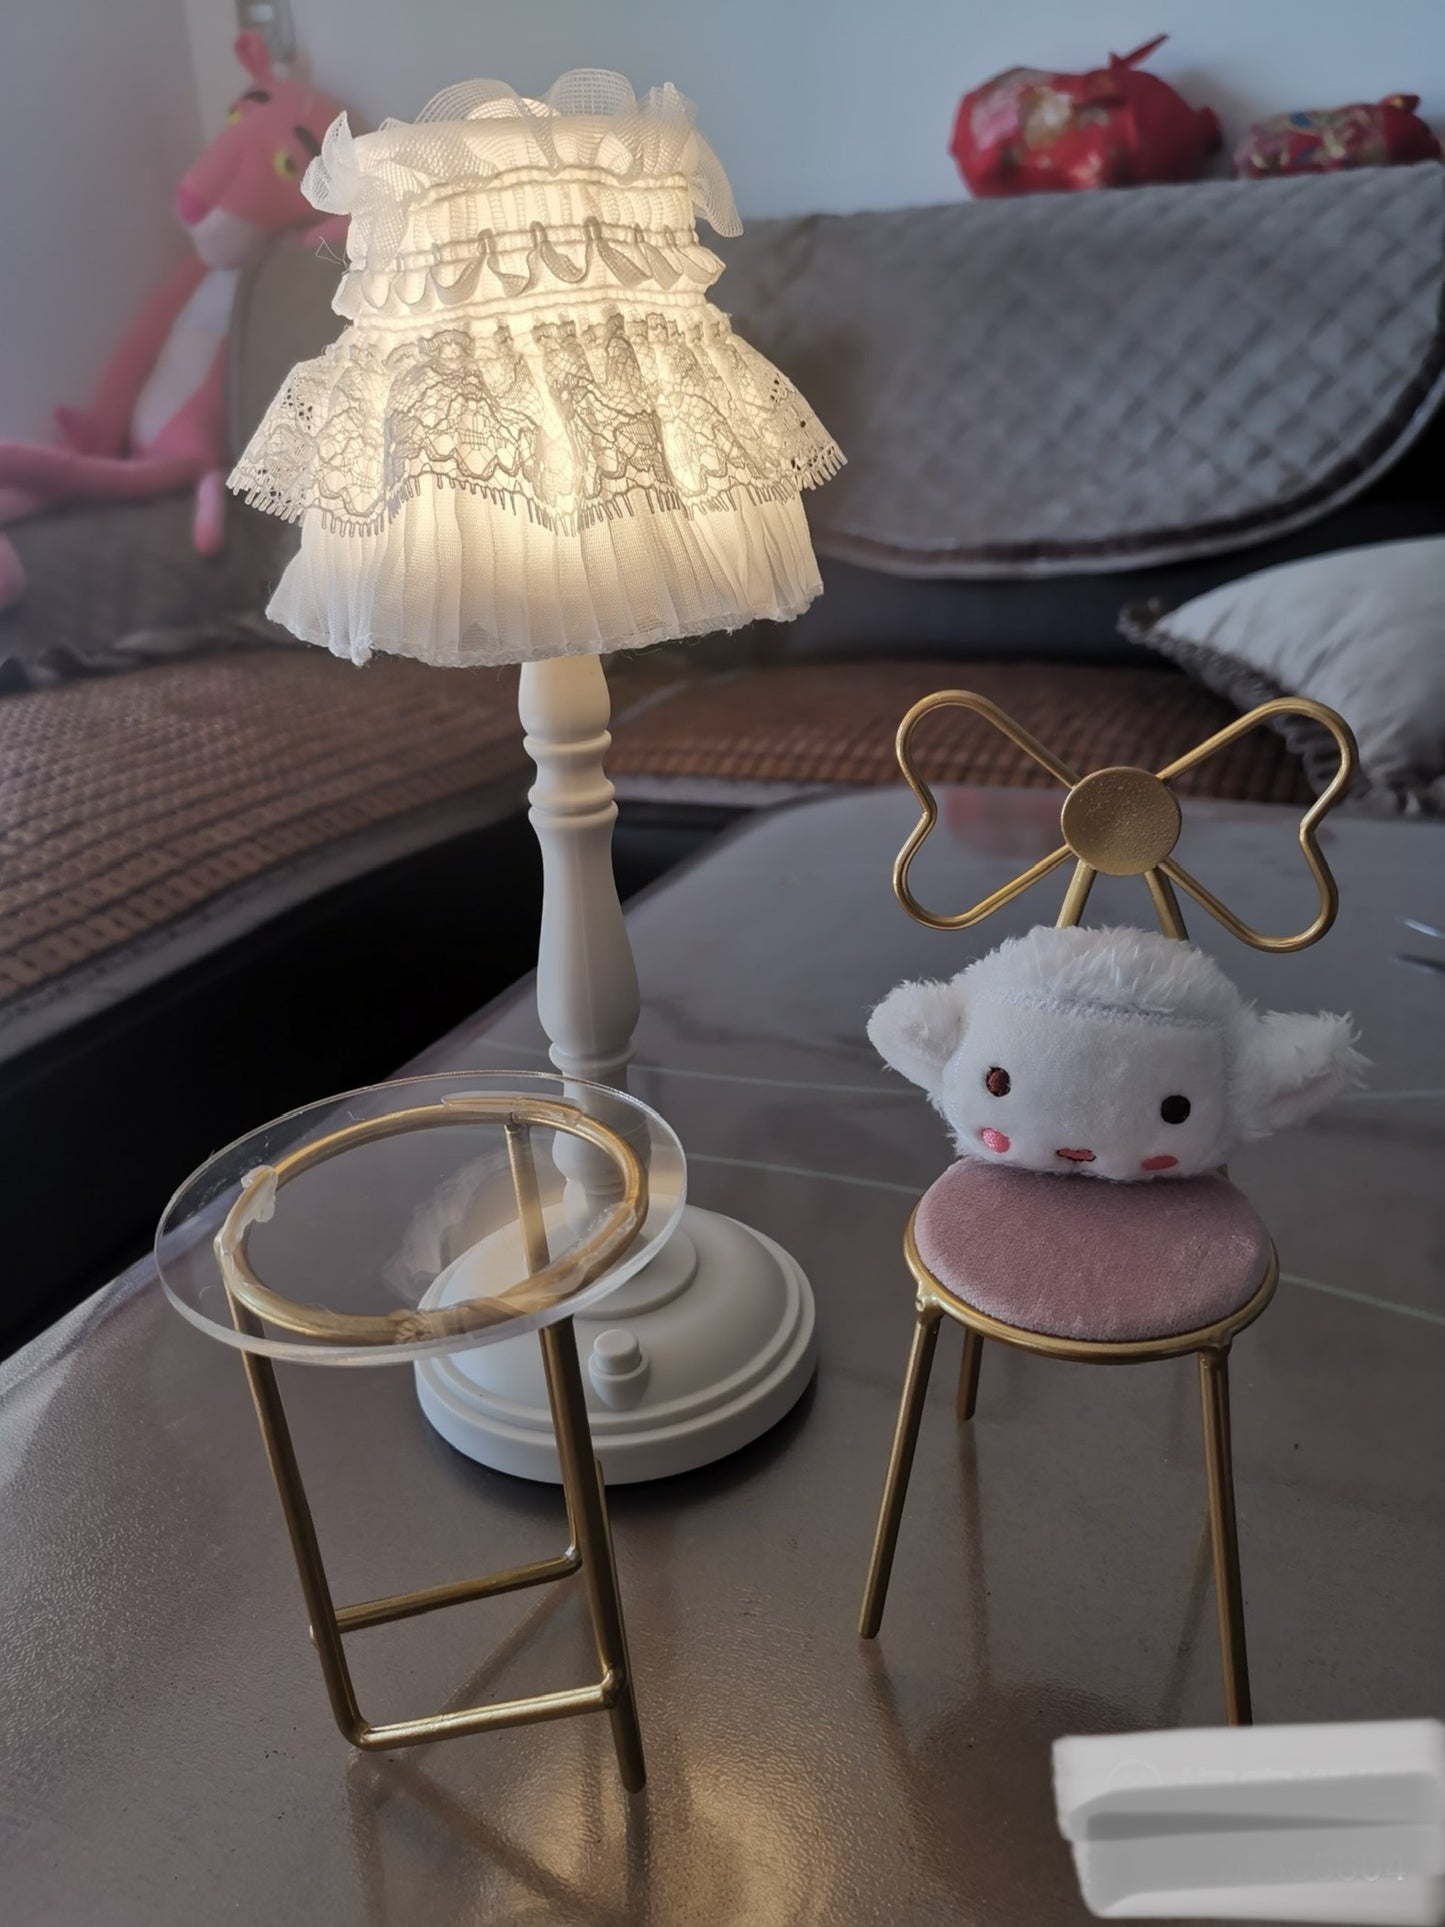 BJD Furniture  lights  for 1/6 size Ball-jointed doll